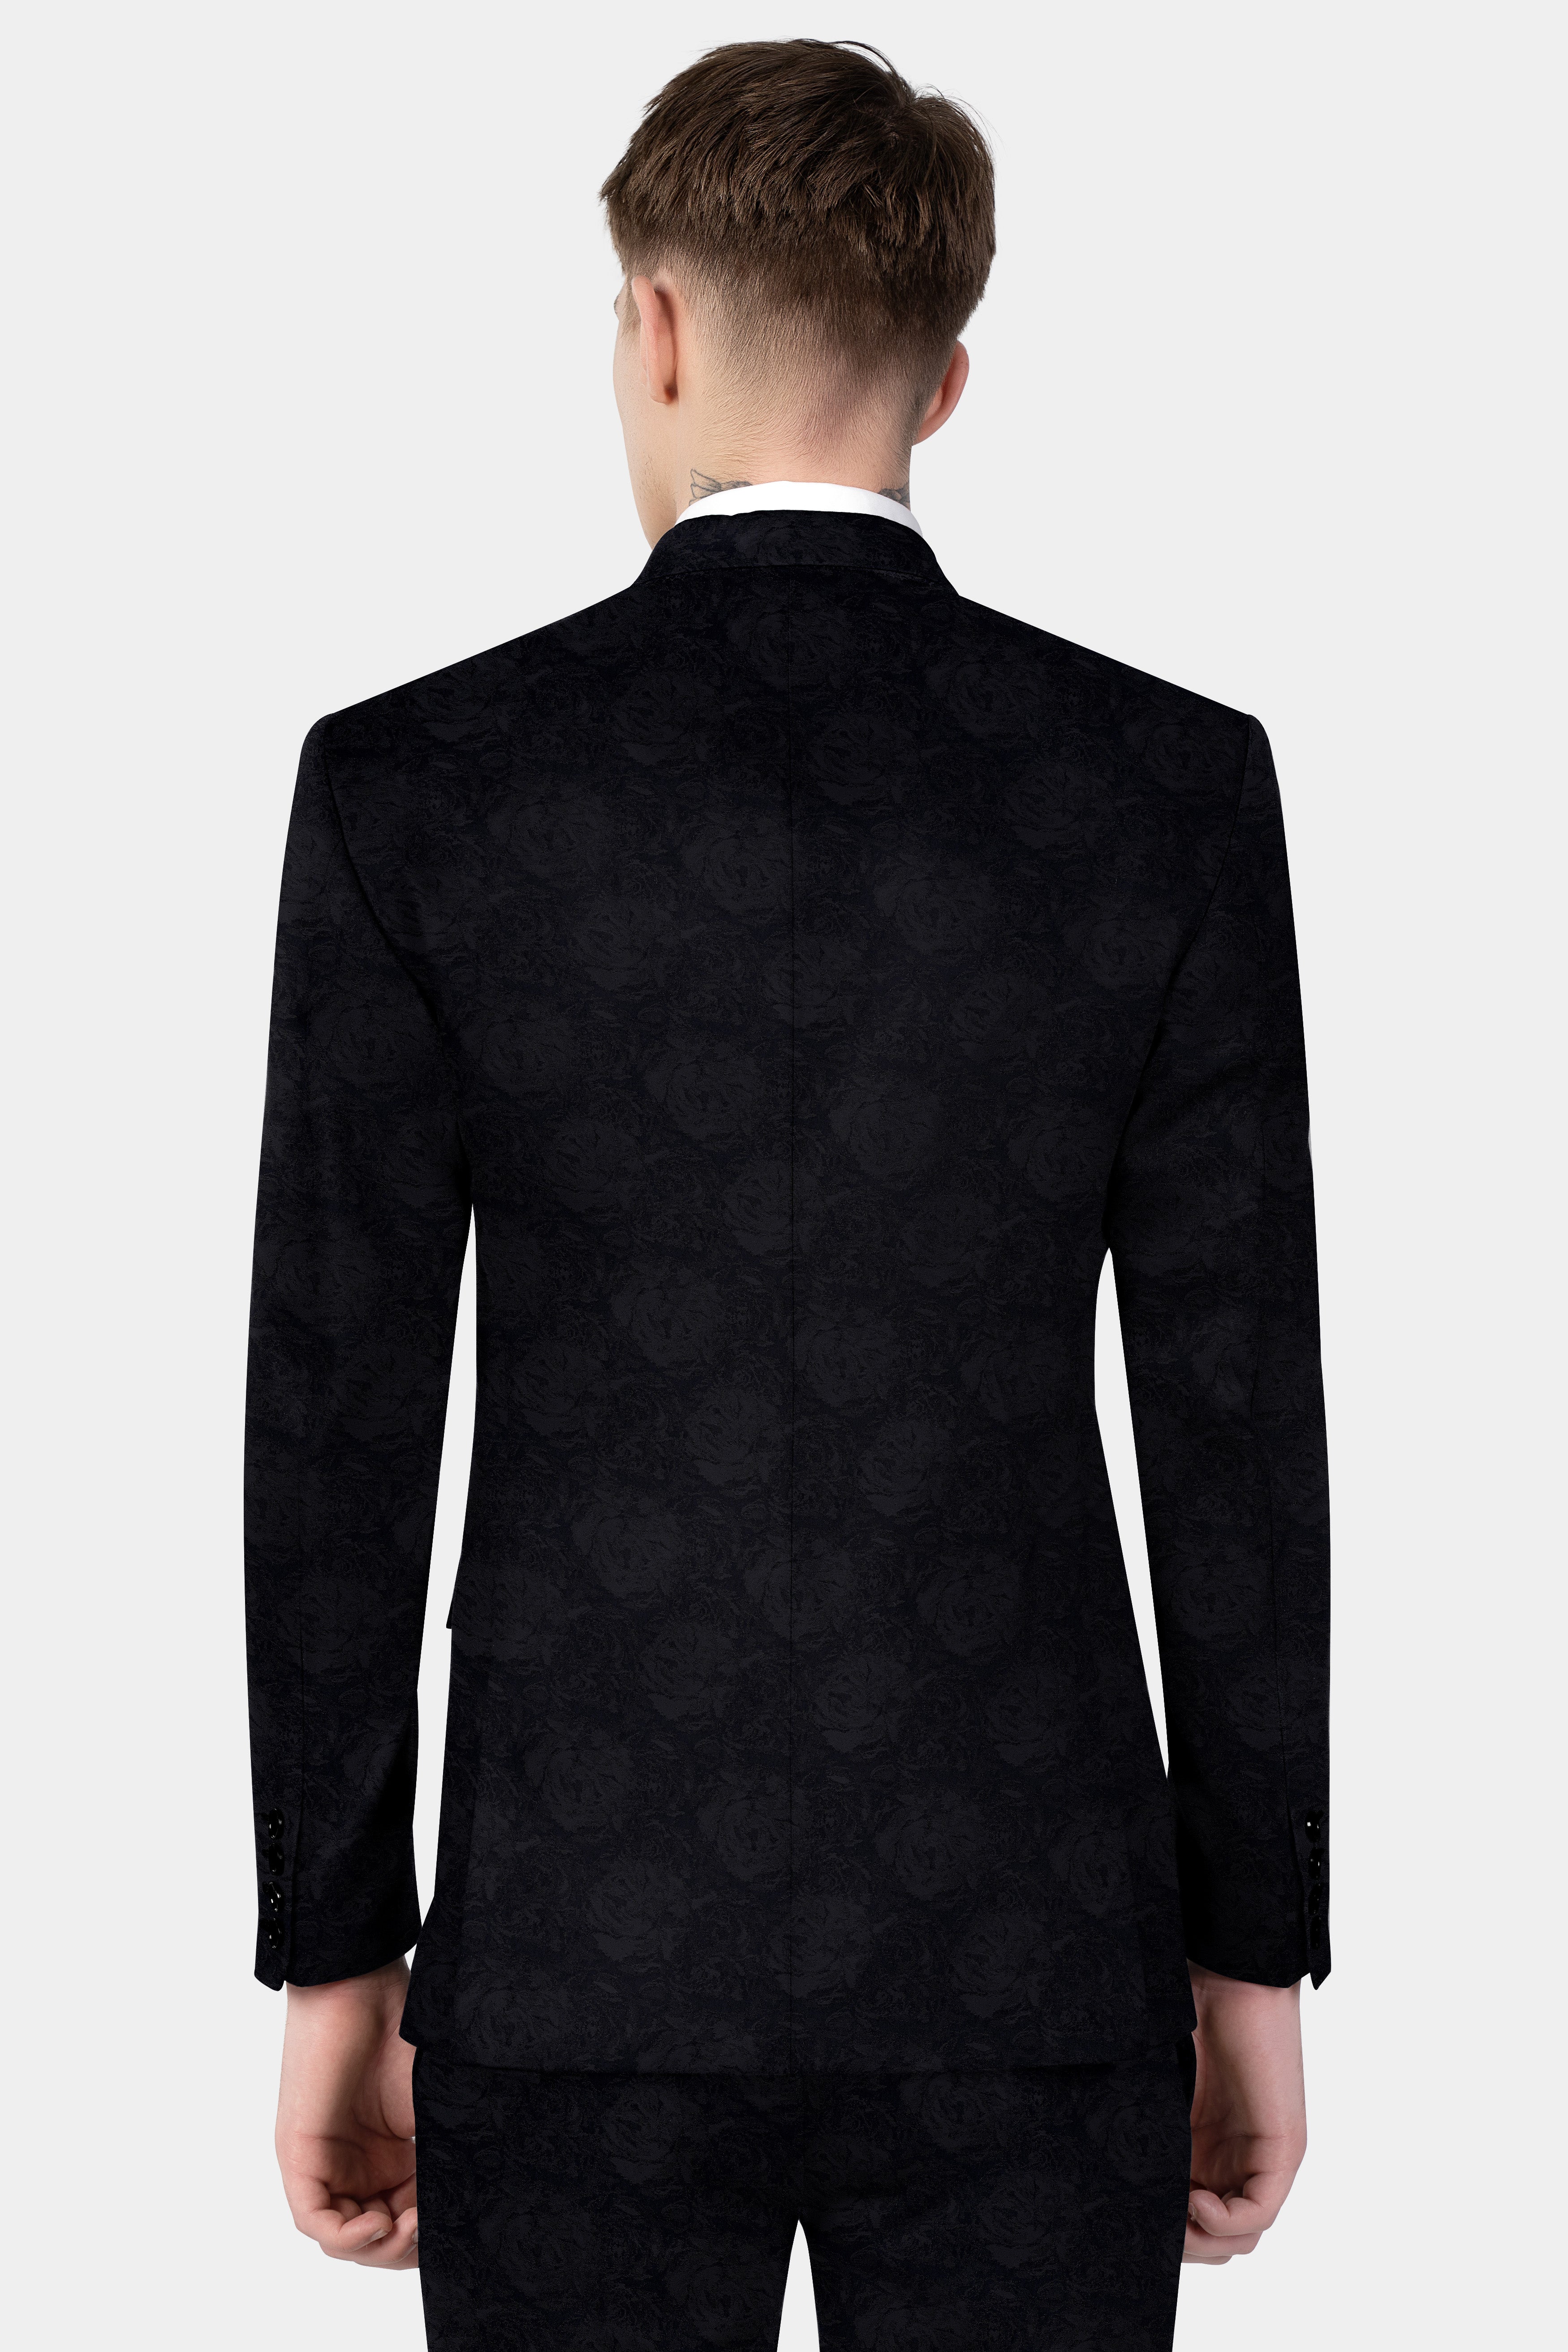 Jade Black Jacquard Textured Double Breasted Suit